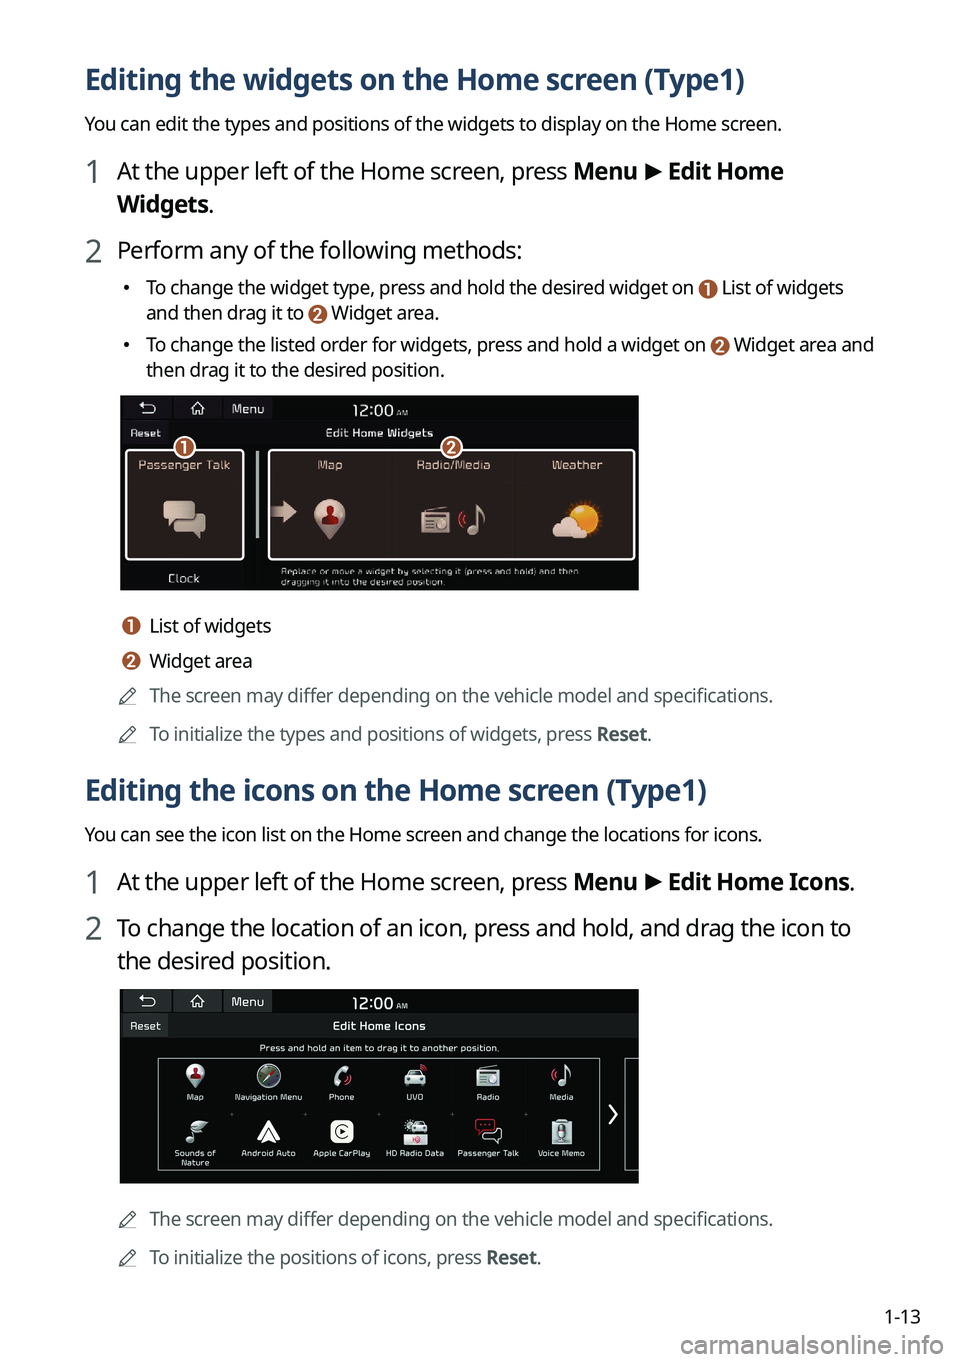 KIA CARNIVAL 2023  Navigation System Quick Reference Guide 1-13
Editing the widgets on the Home screen (Type1)
You can edit the types and positions of the widgets to display on the Home screen.
1 At the upper left of the Home screen, press Menu >
 Edit Home 
